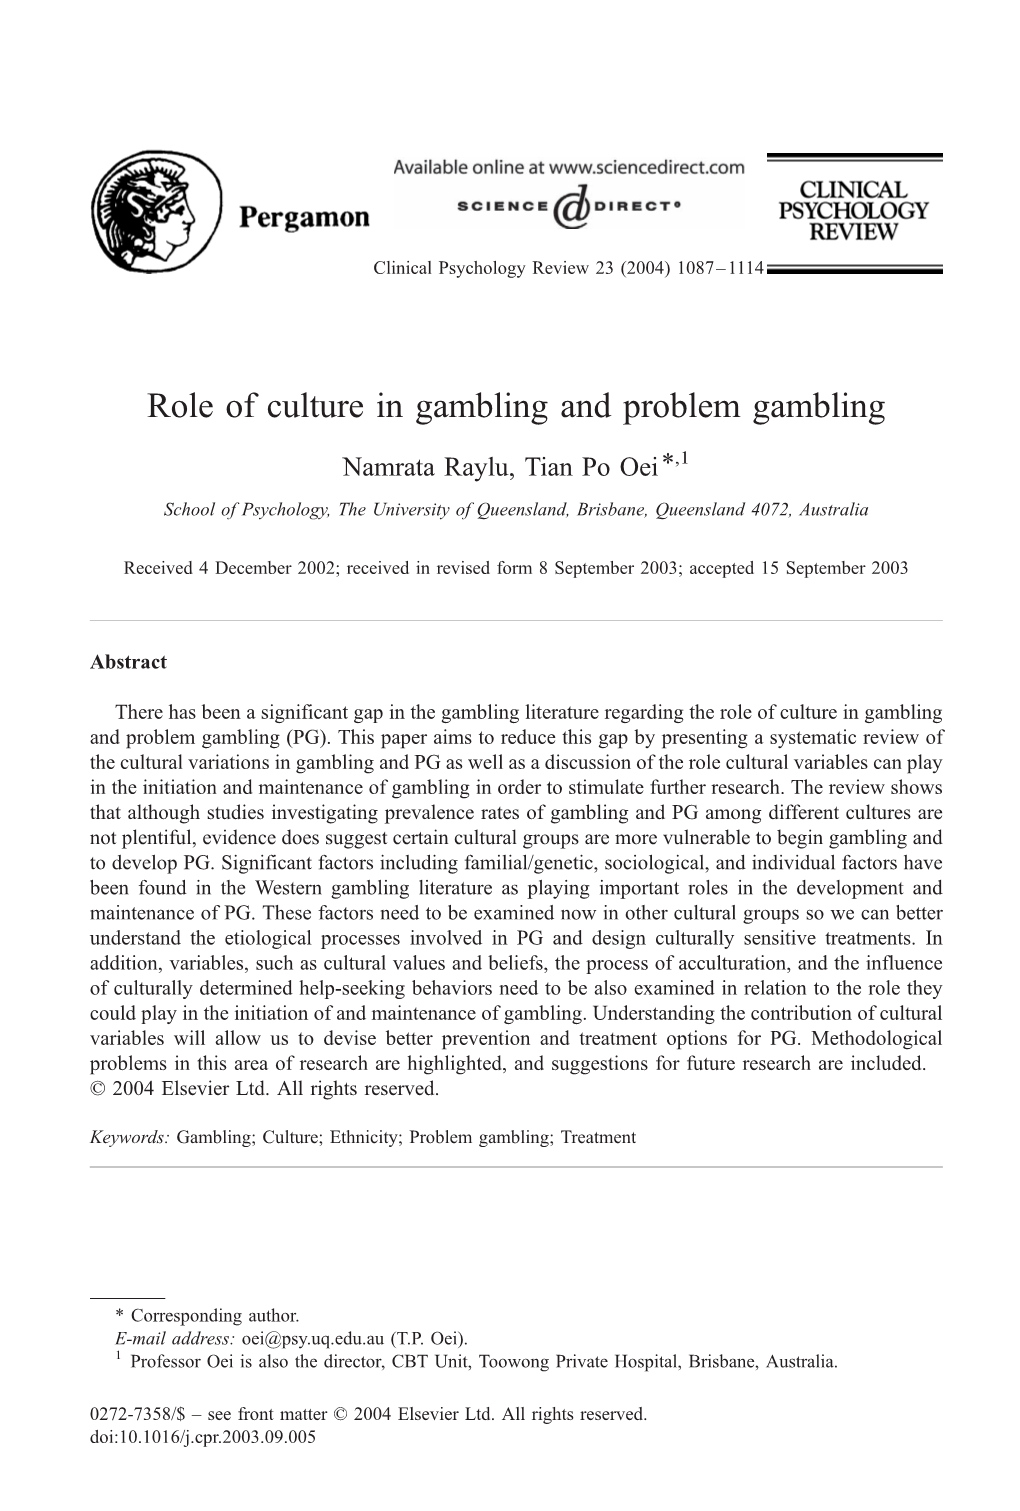 Role of Culture in Gambling and Problem Gambling